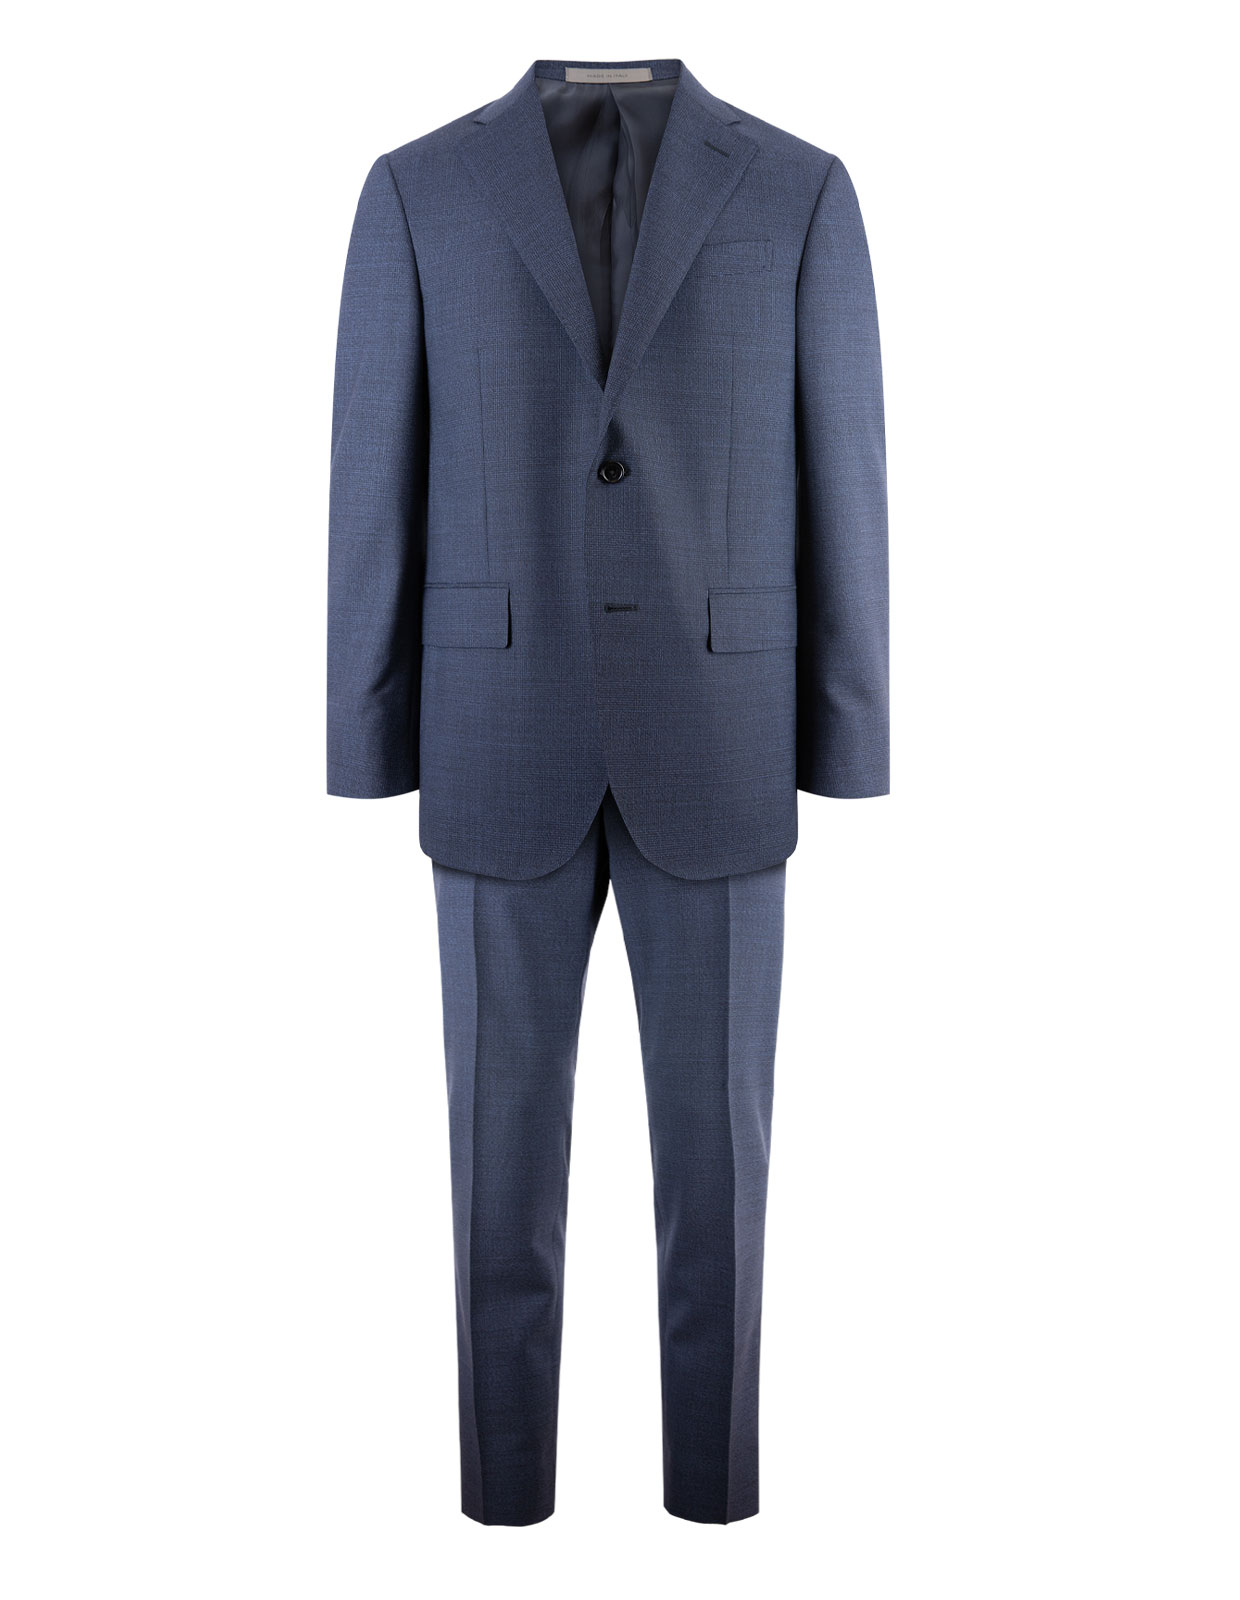 Leader Suit Tropical Wool Blue Glencheck